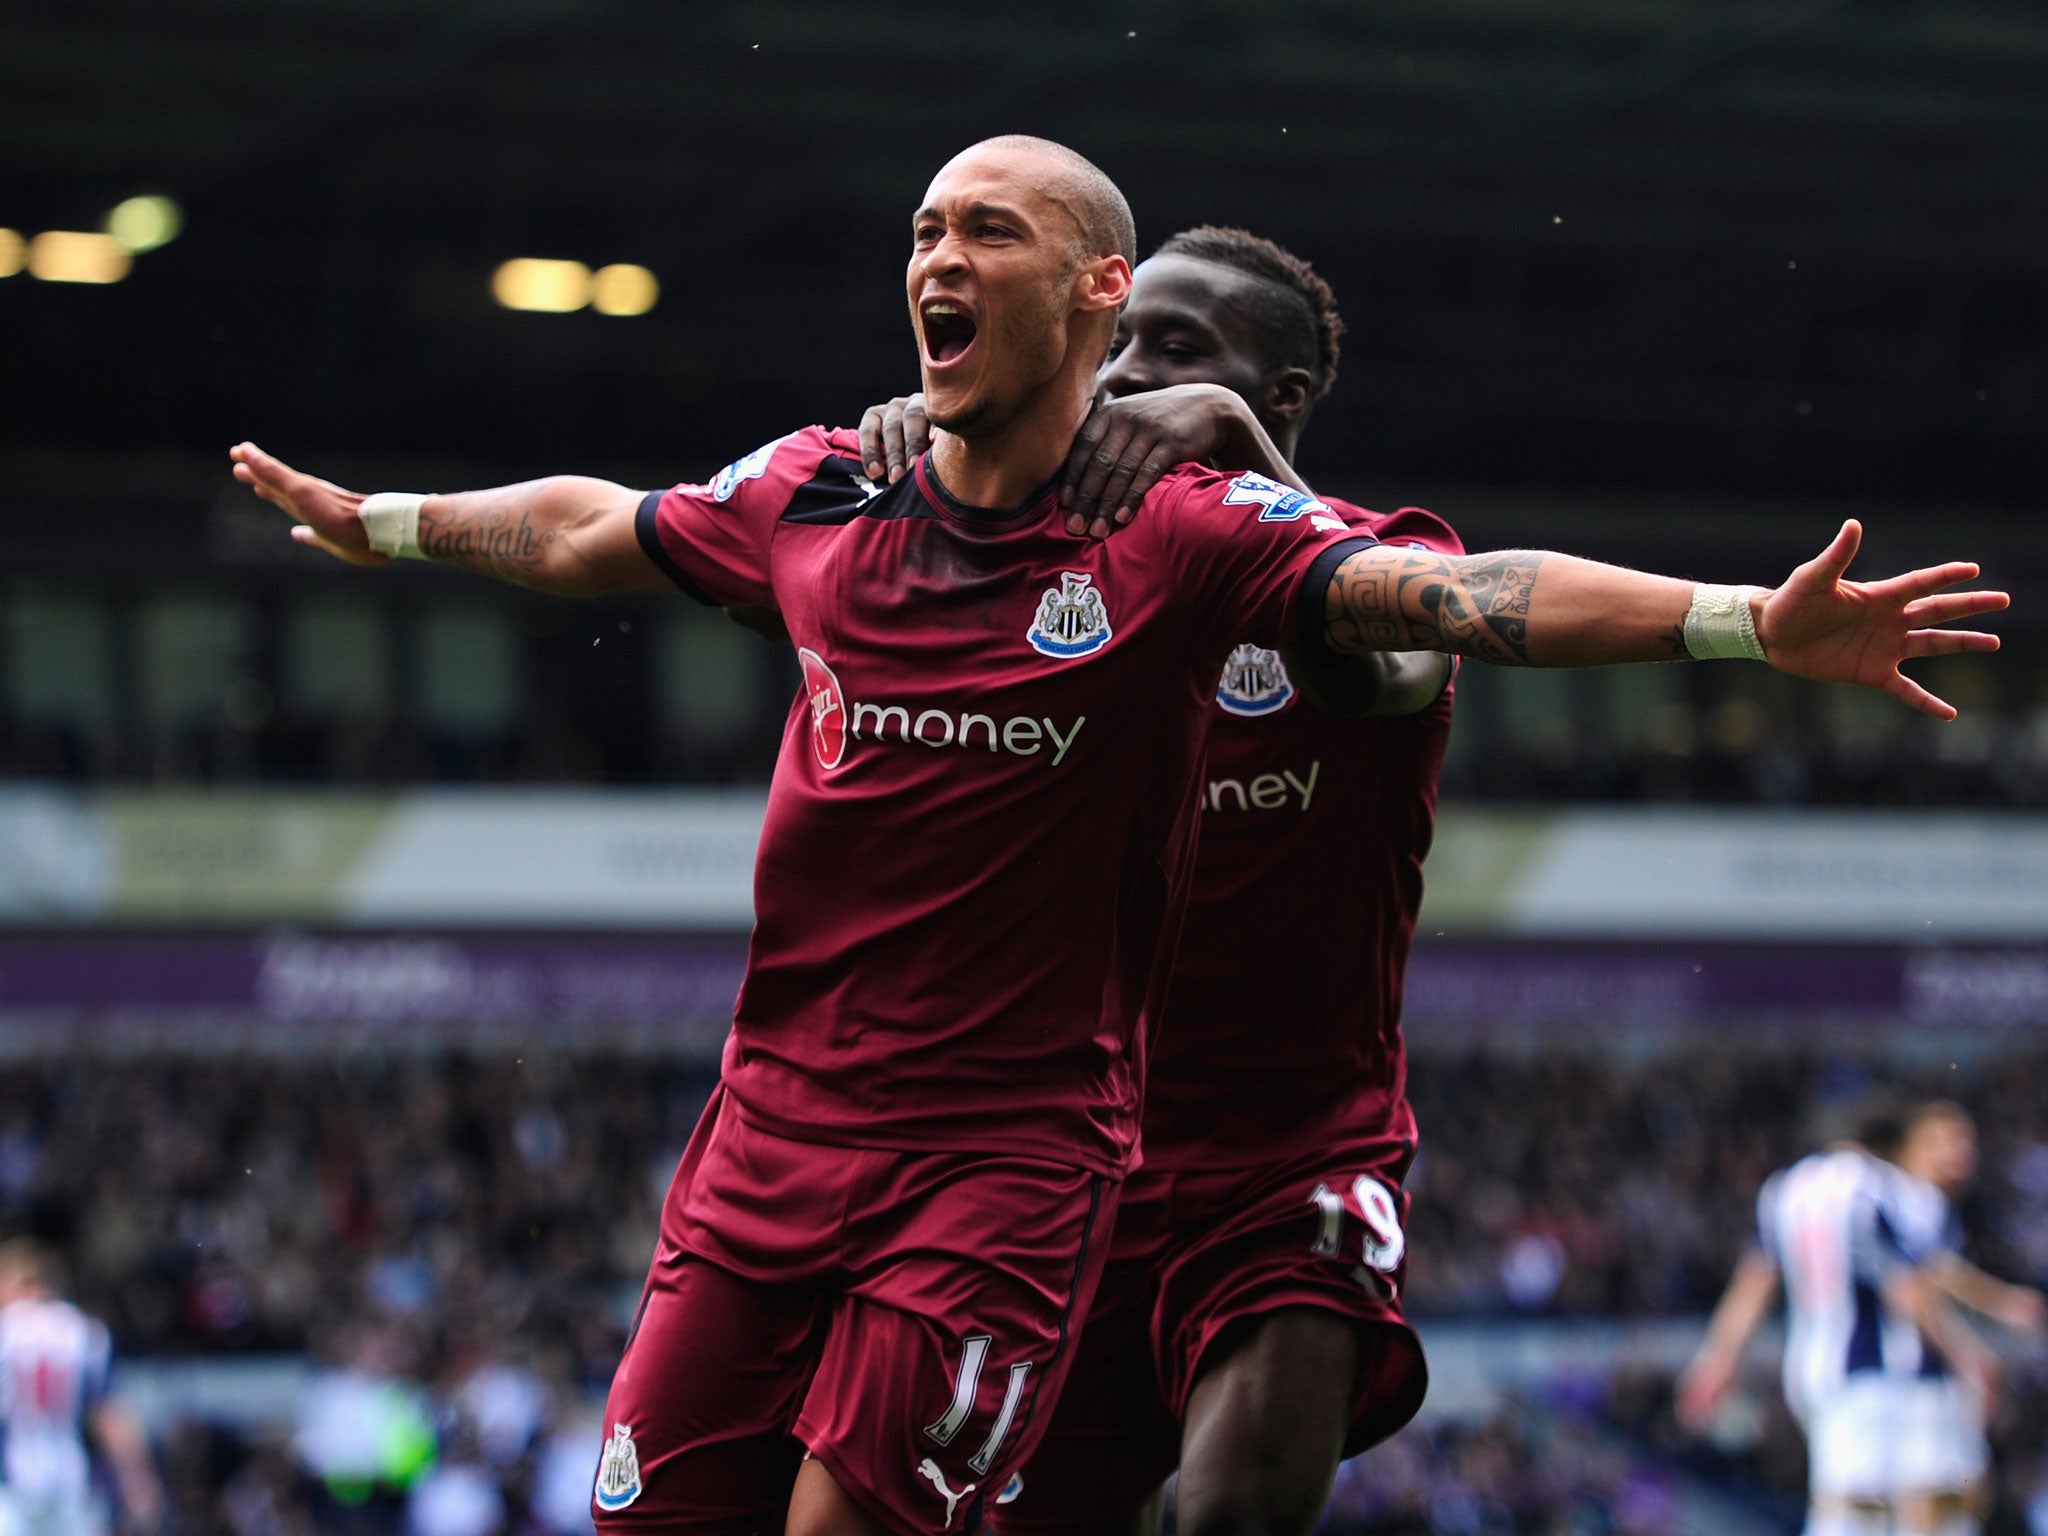 The Magpies dominated the first half of their Barclays Premier League clash at The Hawthorns and deservedly led through Yoan Gouffran's early header